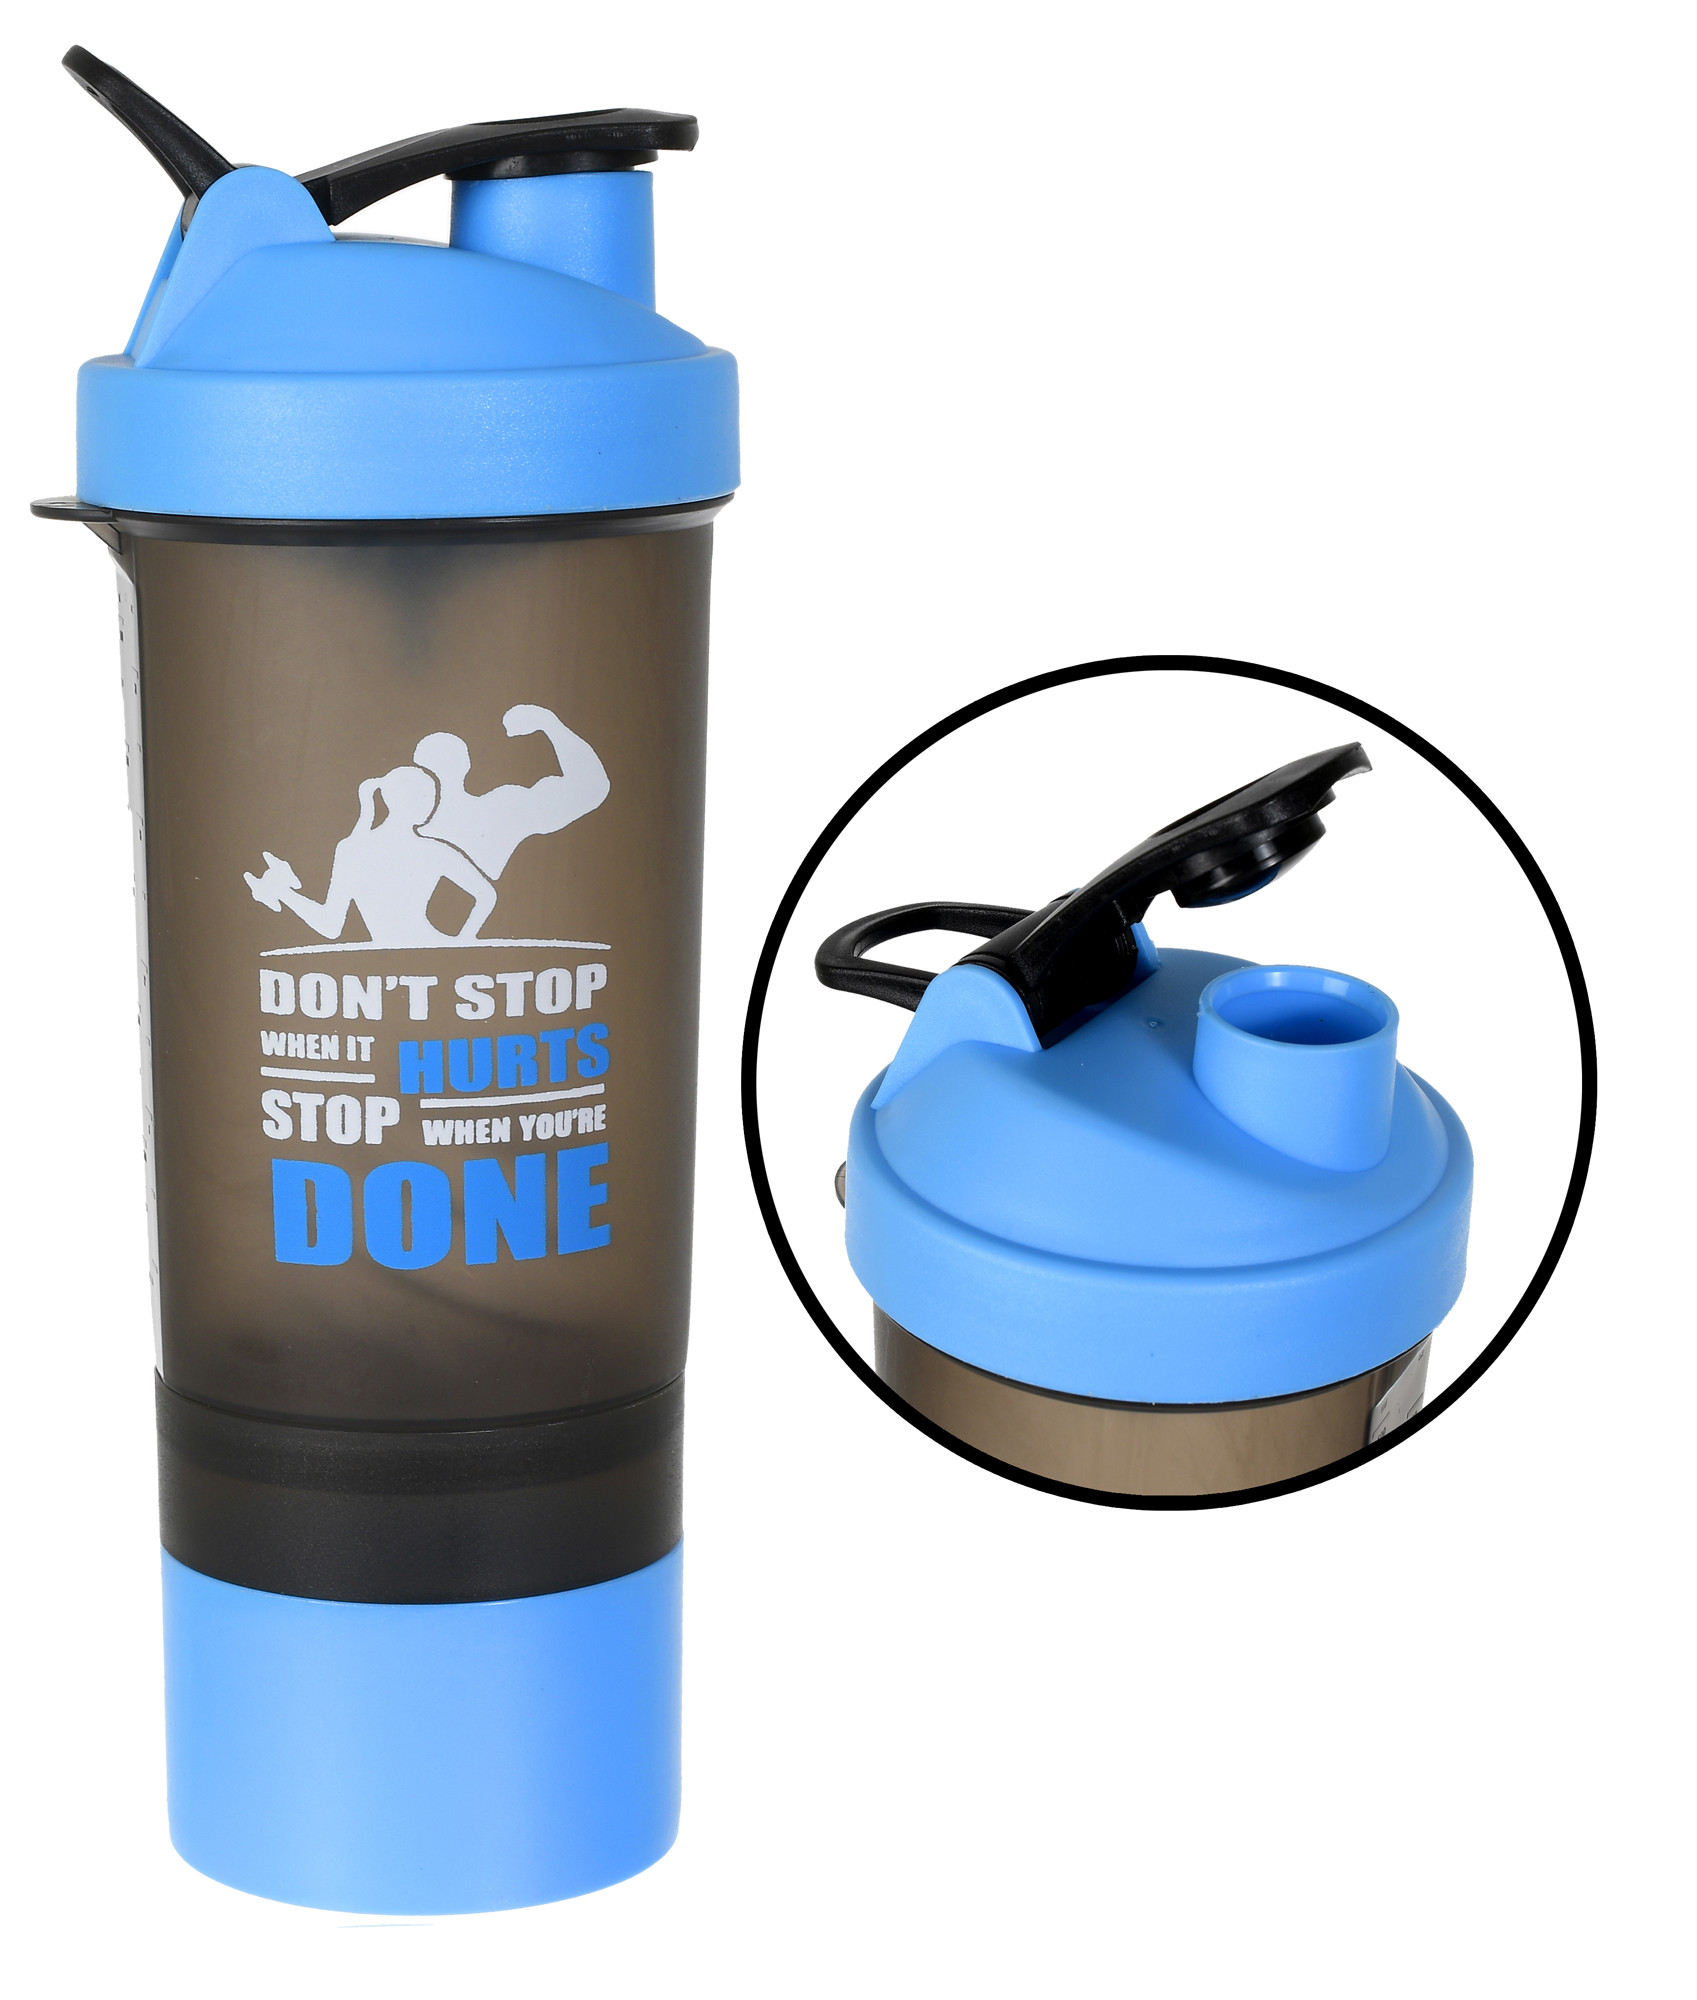 Kuber Industries Classic Shaker Bottle Perfect for Protein Shakes and Pre Workout with Pill Organizer and Storage for Protein Powder (Blue)